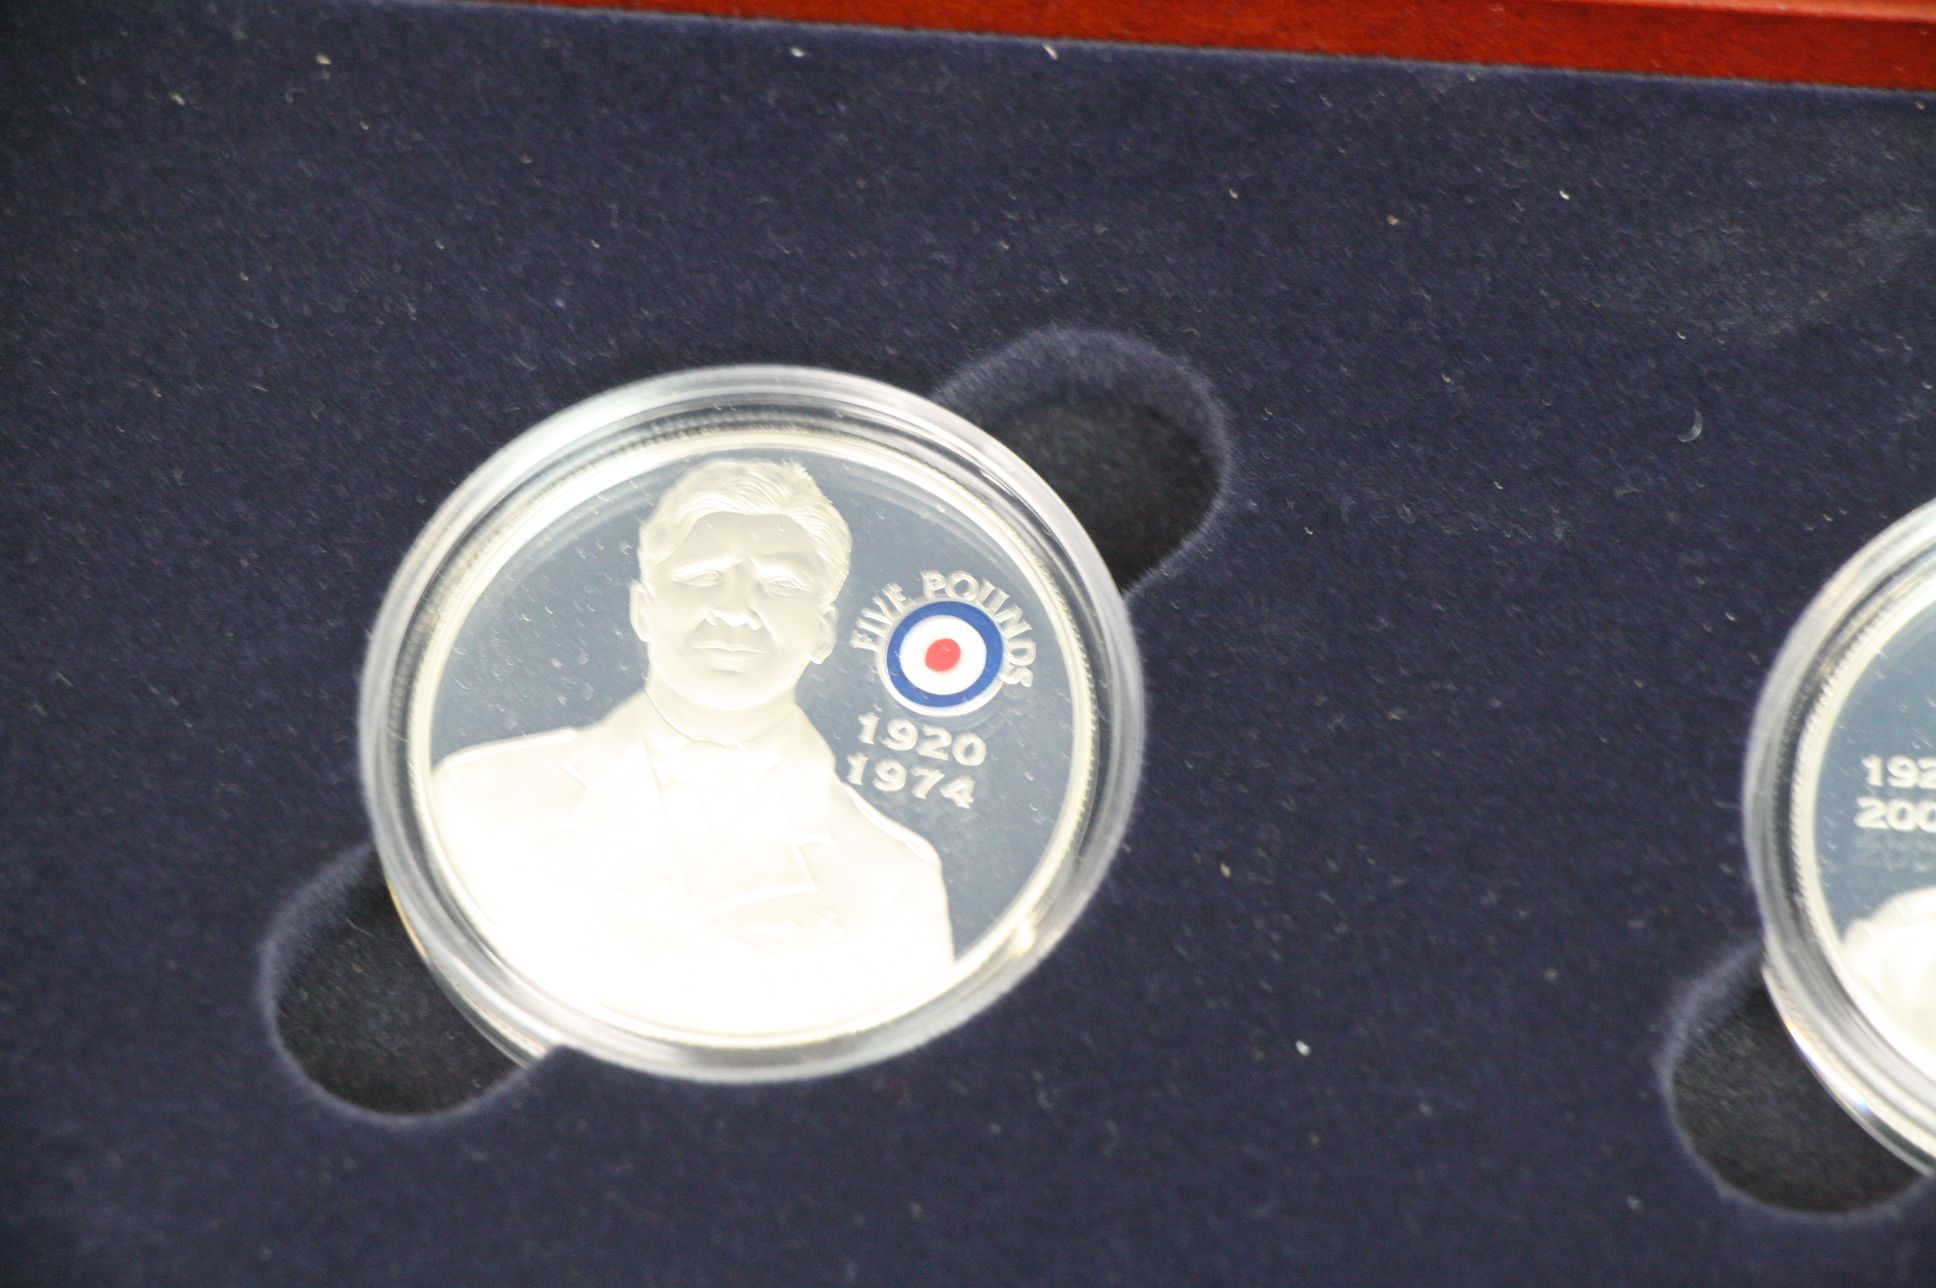 A Royal Mint History Of The RAF / Royal Air Force Silver Proof £5 Coin Set, Set Of 18 x £5 Silver - Image 13 of 21